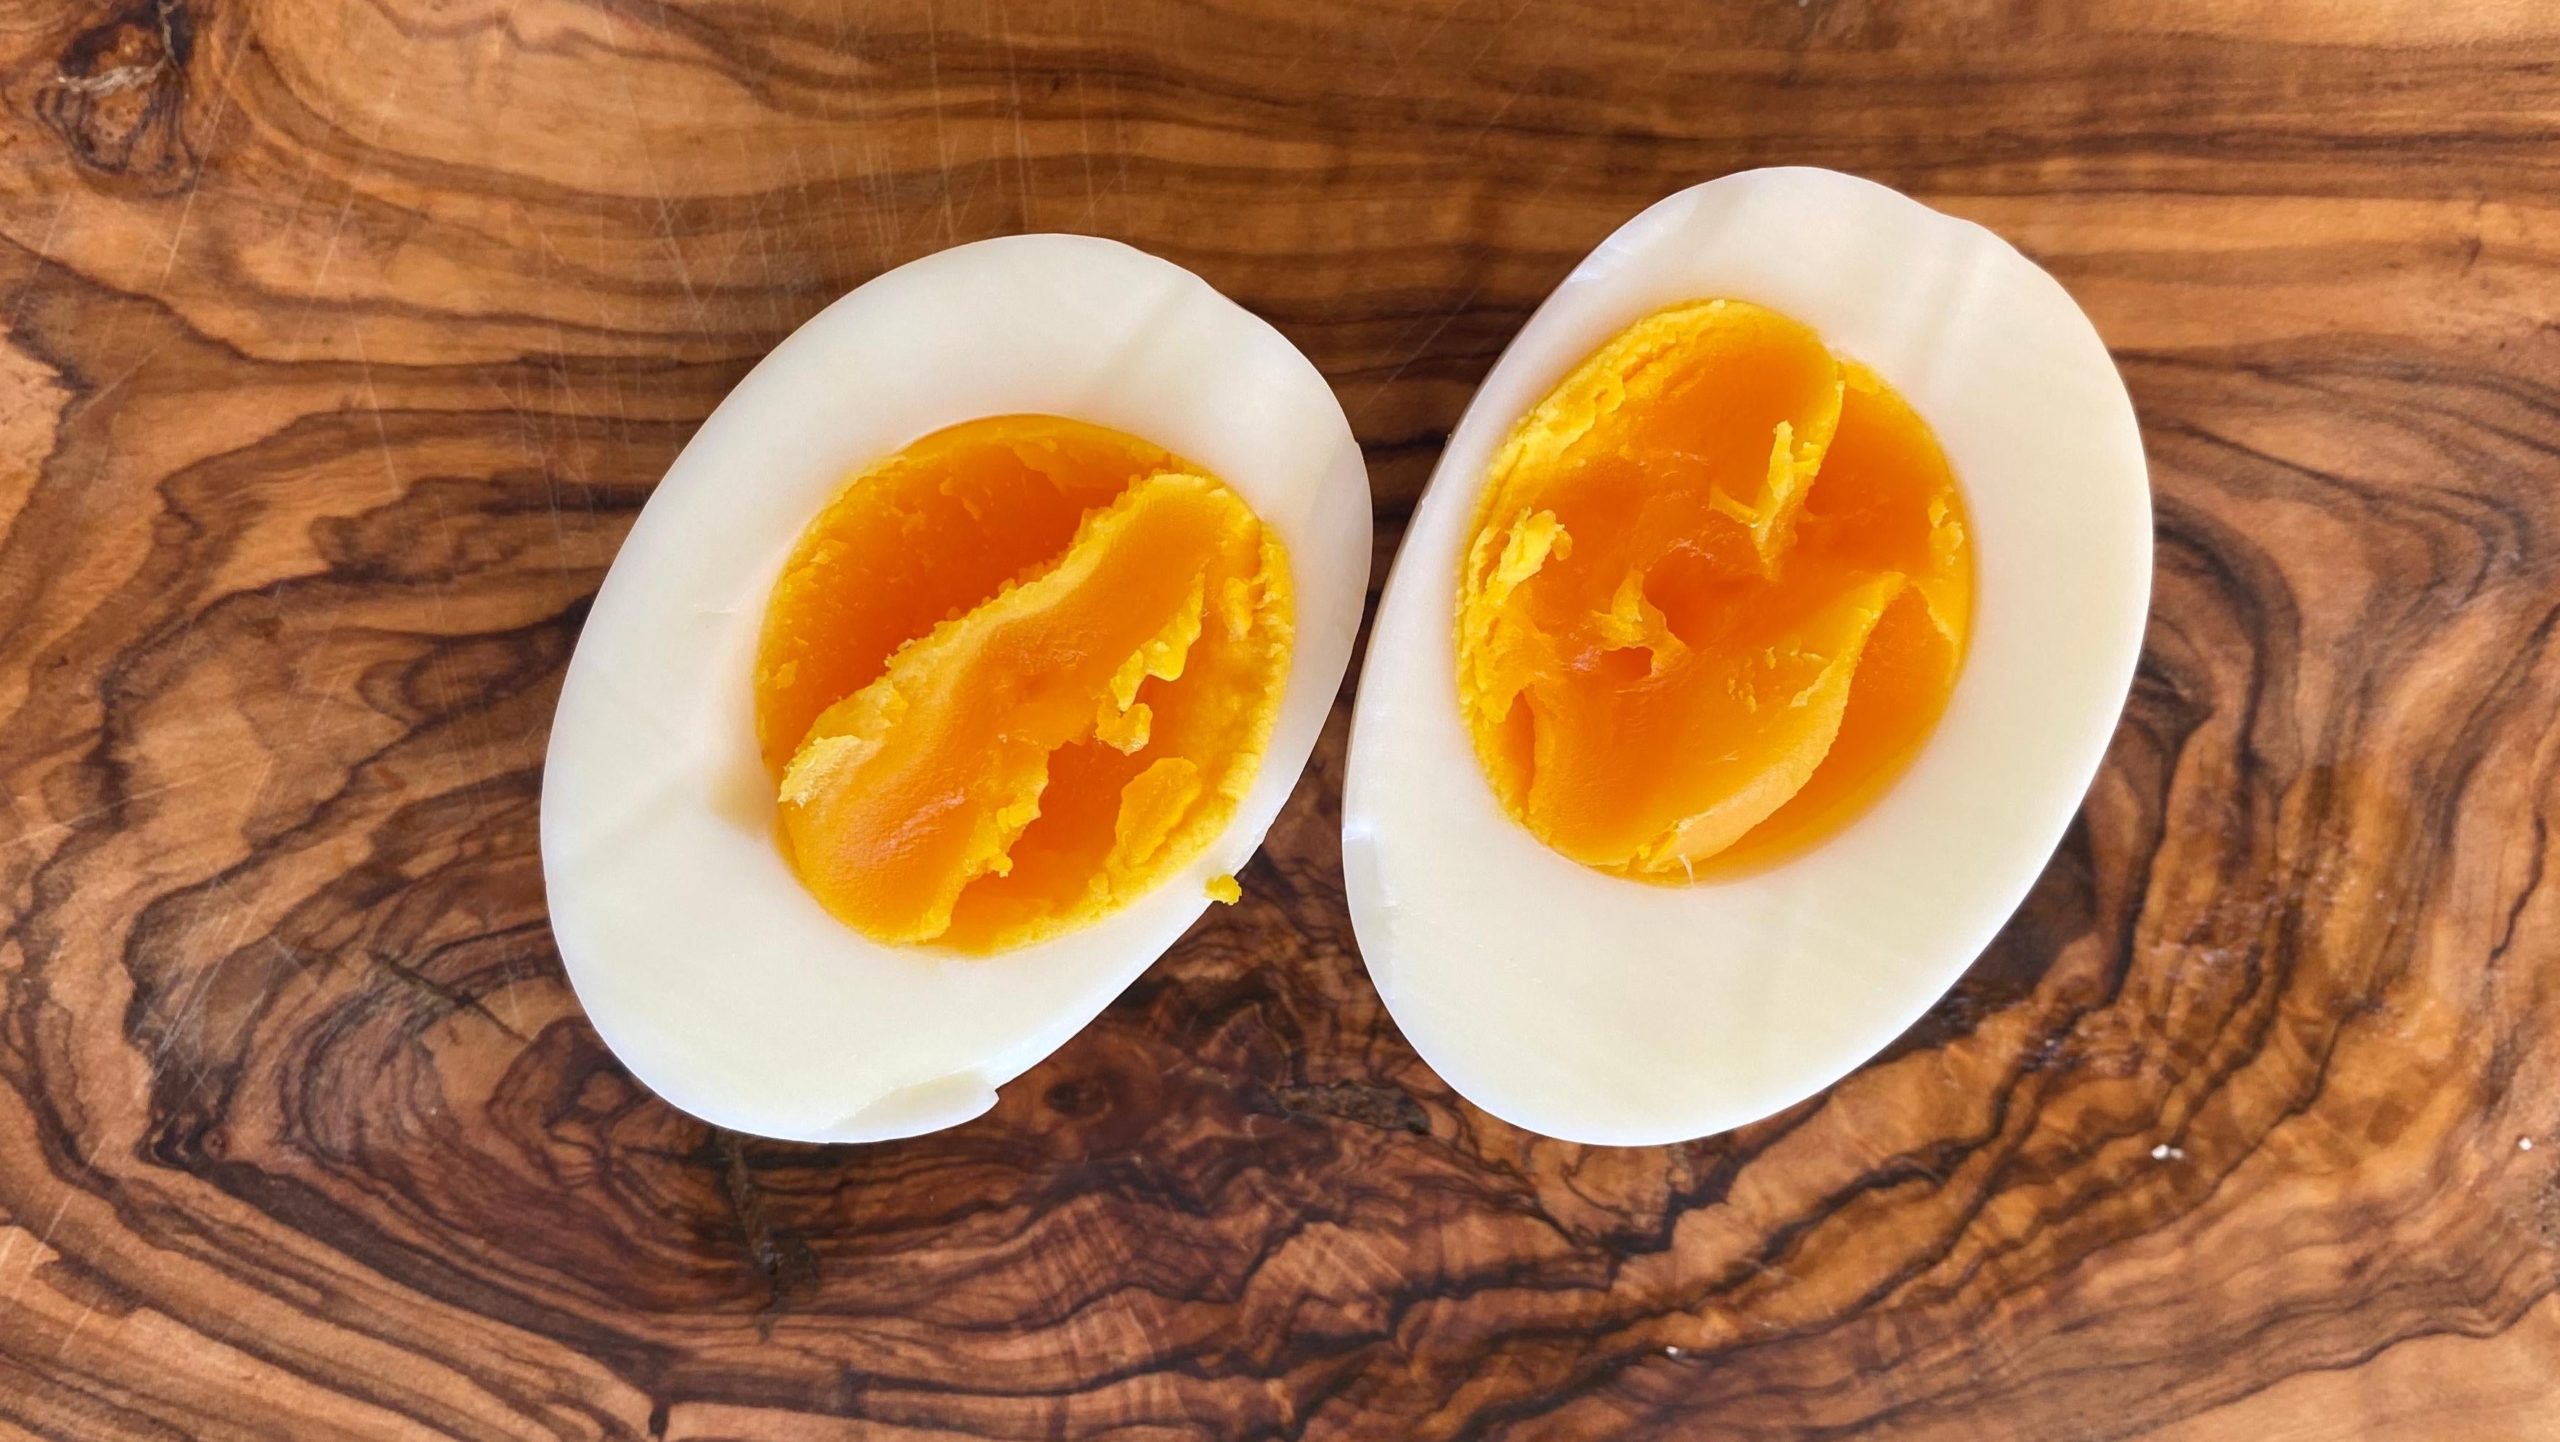 The ‘5-5-5’ Instant Pot Method for Hard Boiled Eggs Is a Culinary Abomination